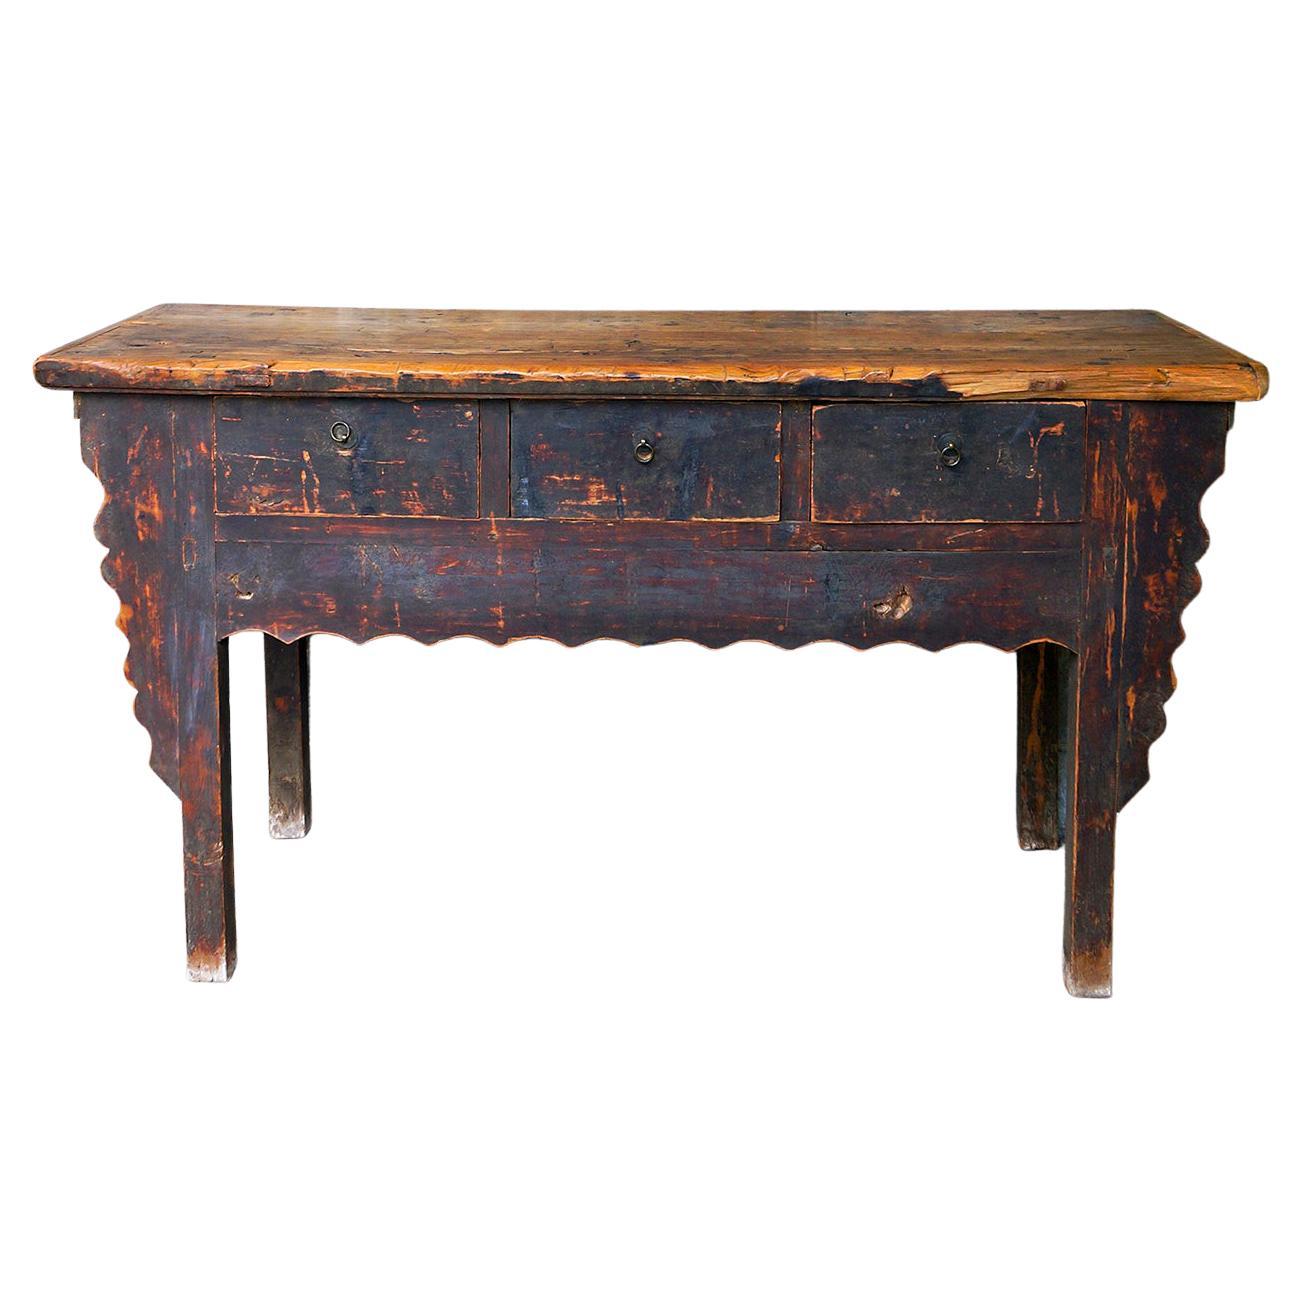 Antique Chinese Console with Original Surface